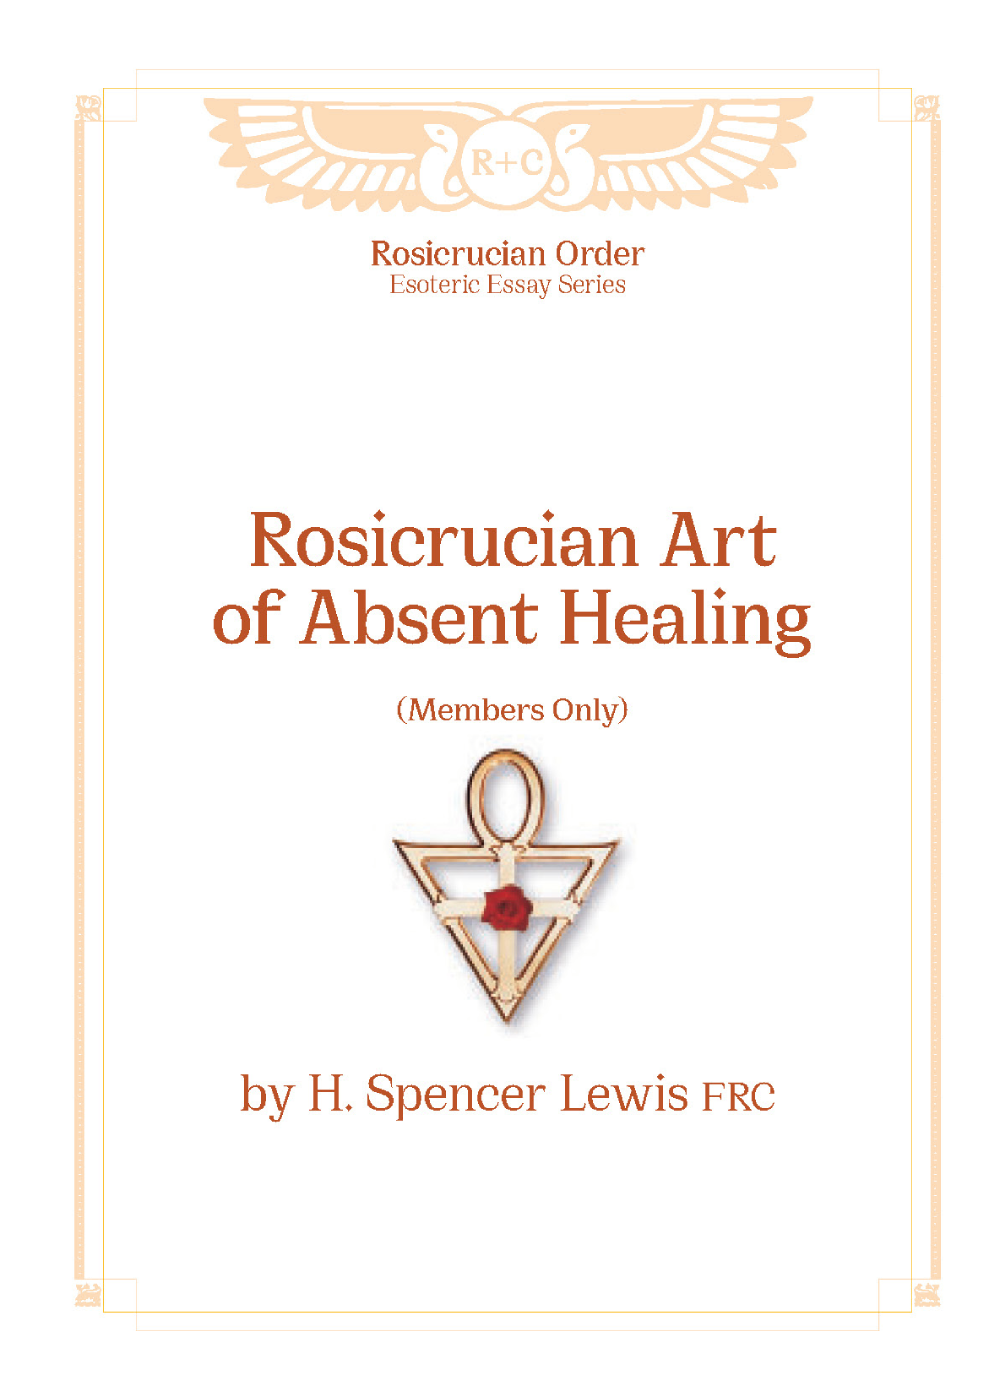 Esoteric Essays - Rosicrucian Art of Absent Healing